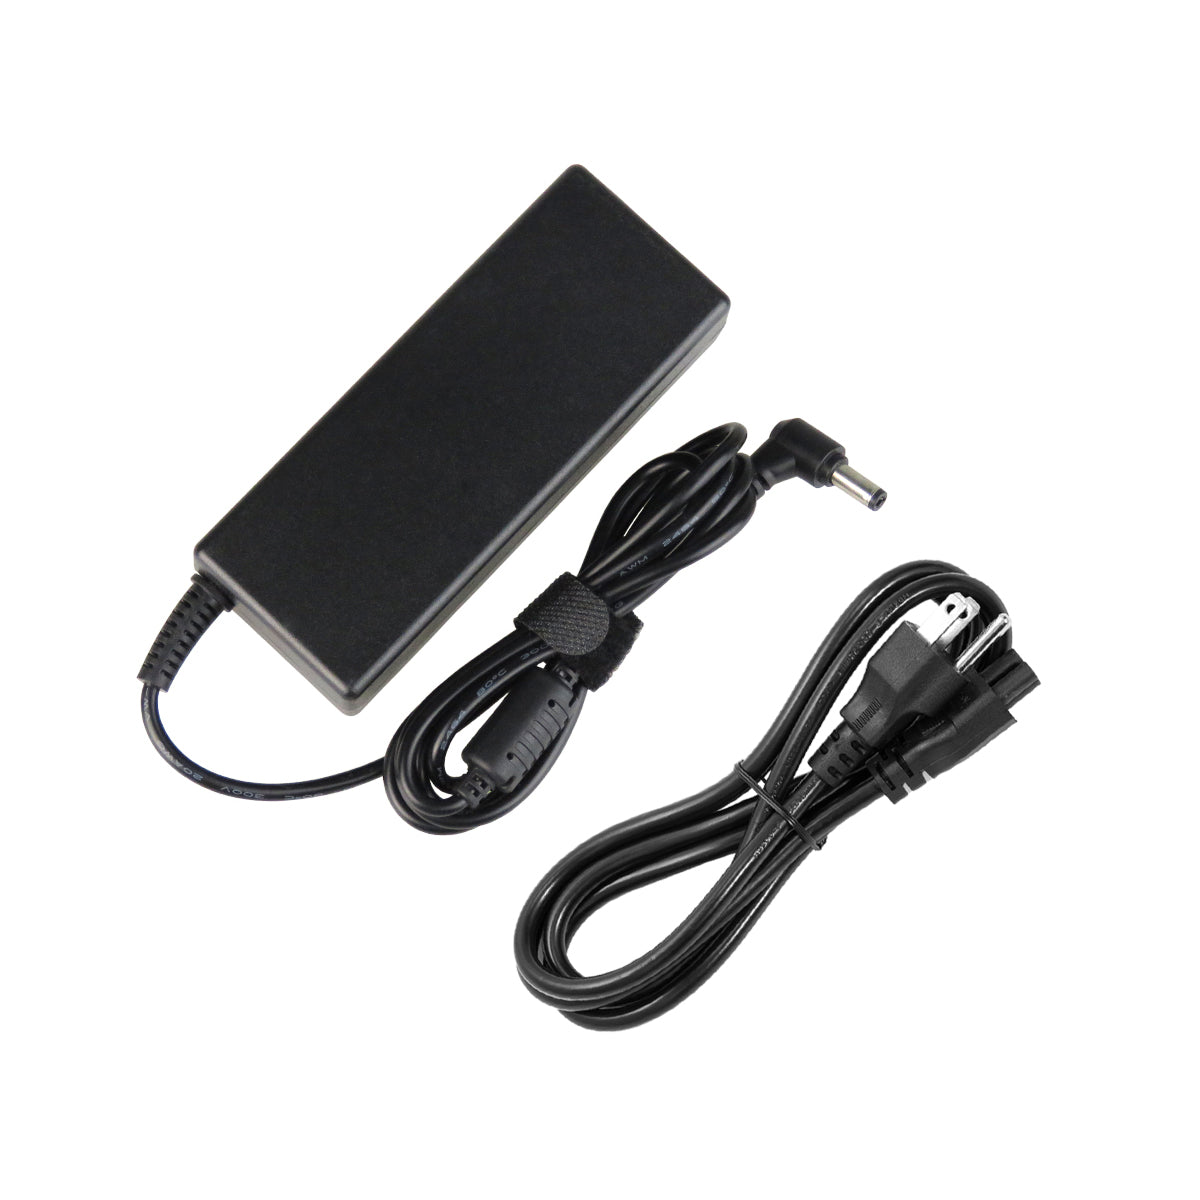 AC Adapter Charger for ASUS X75A-DS31 Notebook.